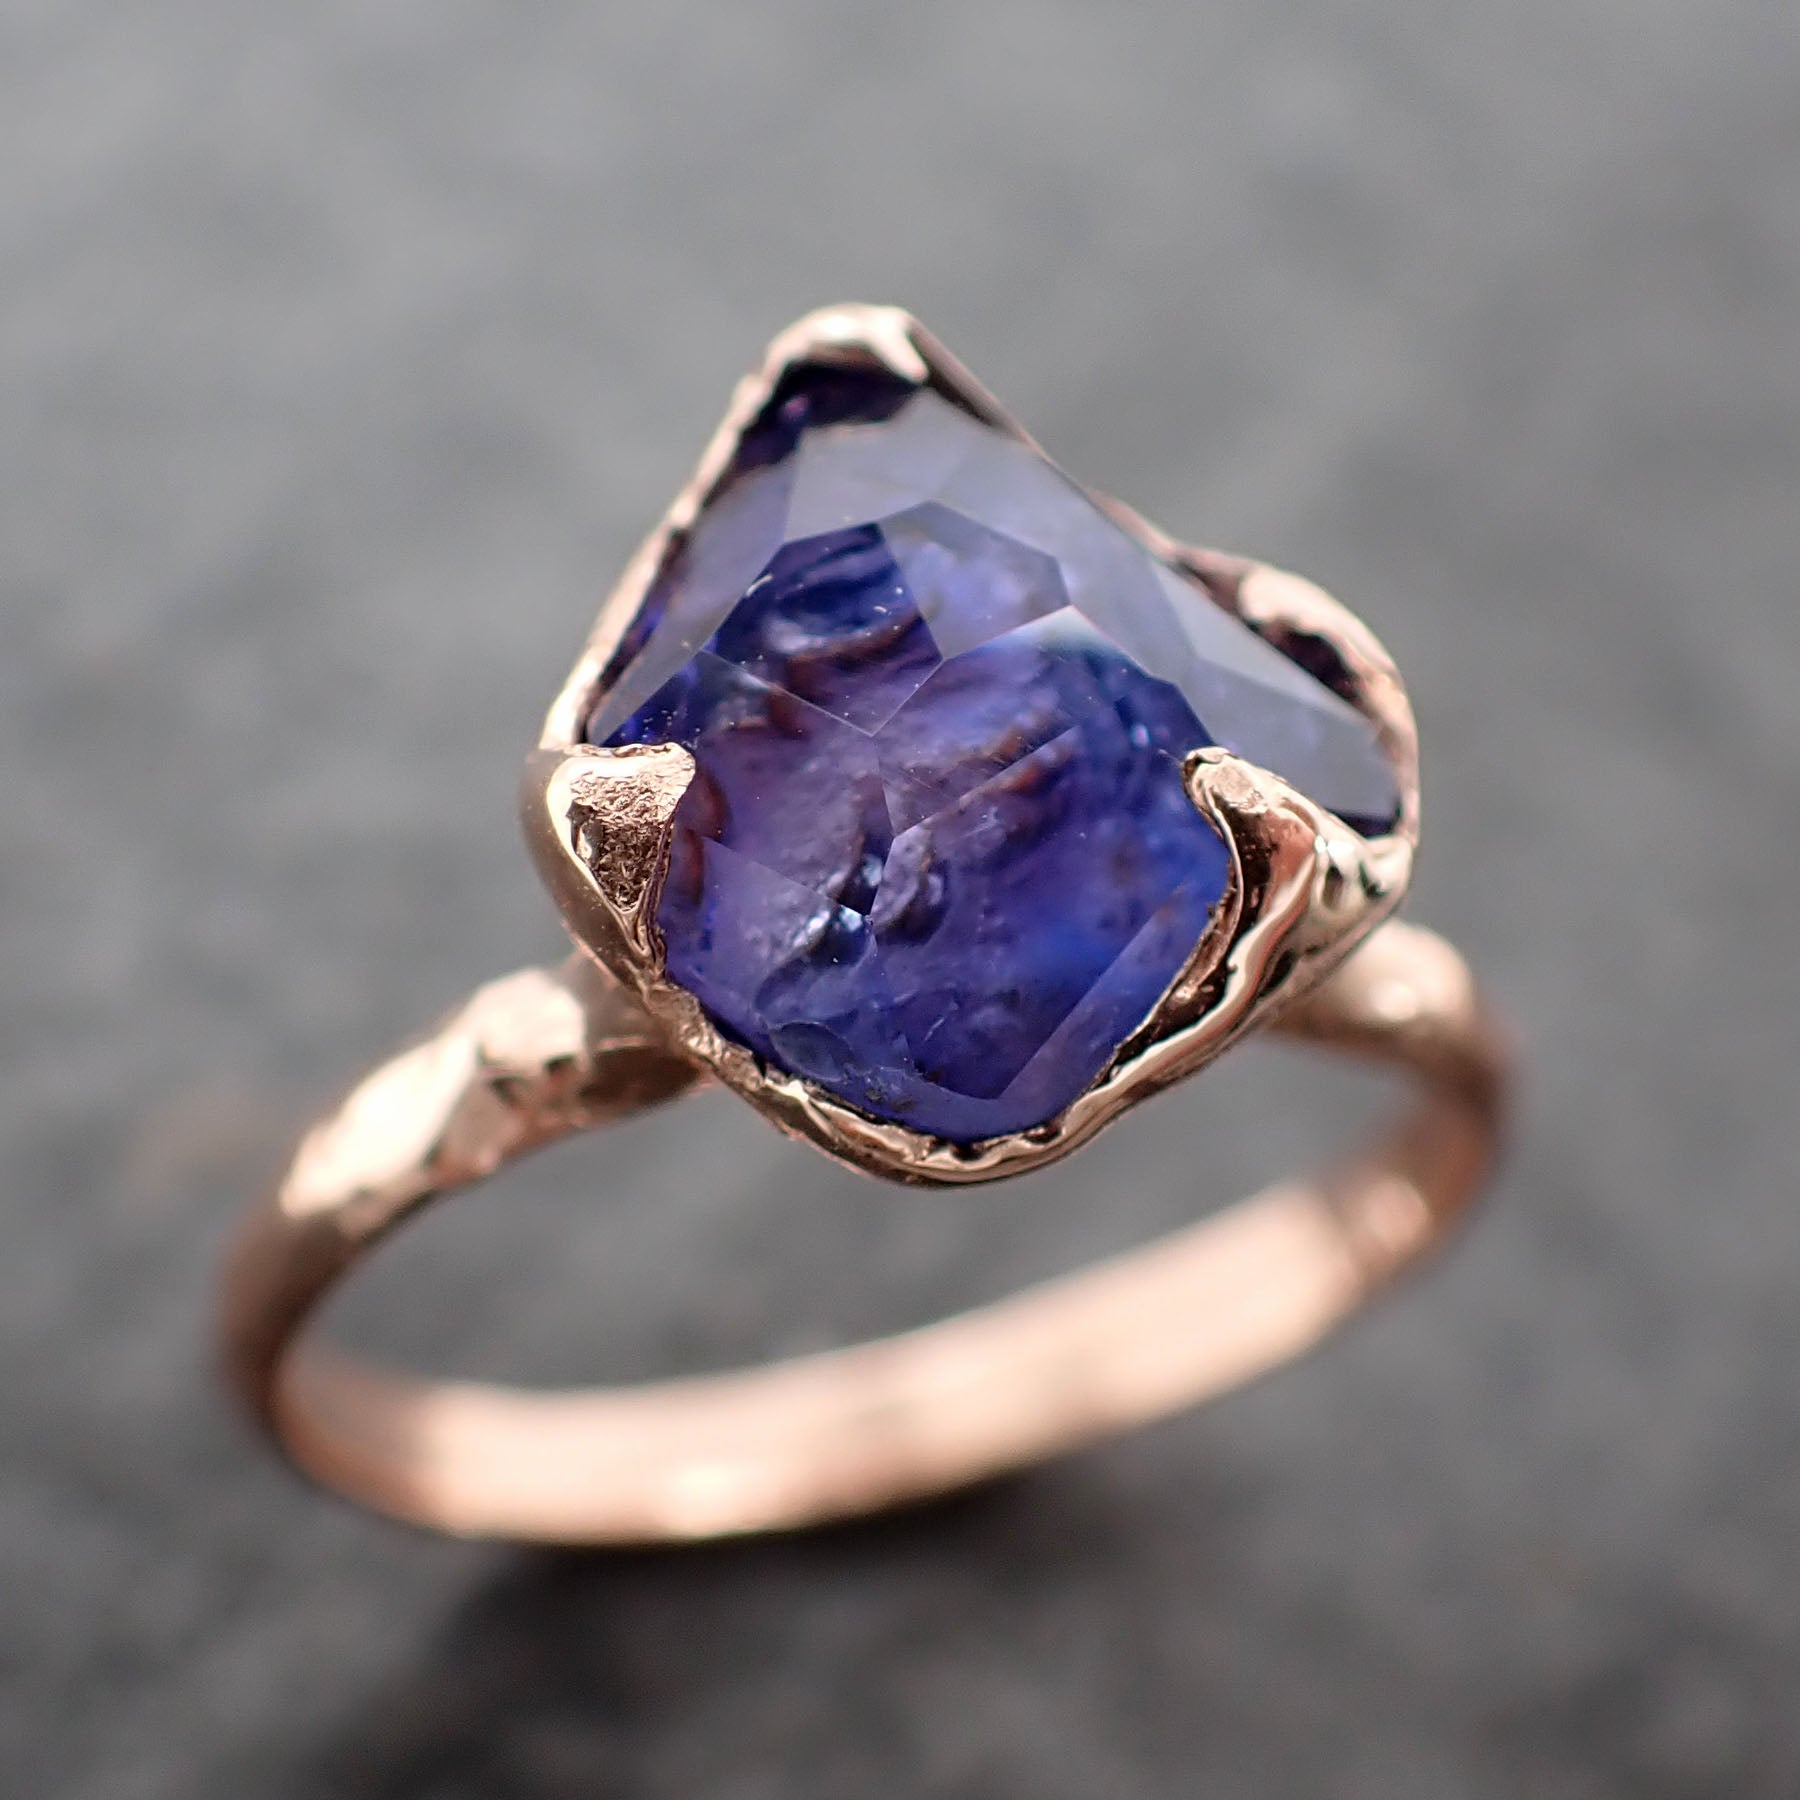 partially faceted purple sapphire 14k rose gold engagement ring wedding ring custom one of a kind gemstone ring solitaire 2538 Alternative Engagement